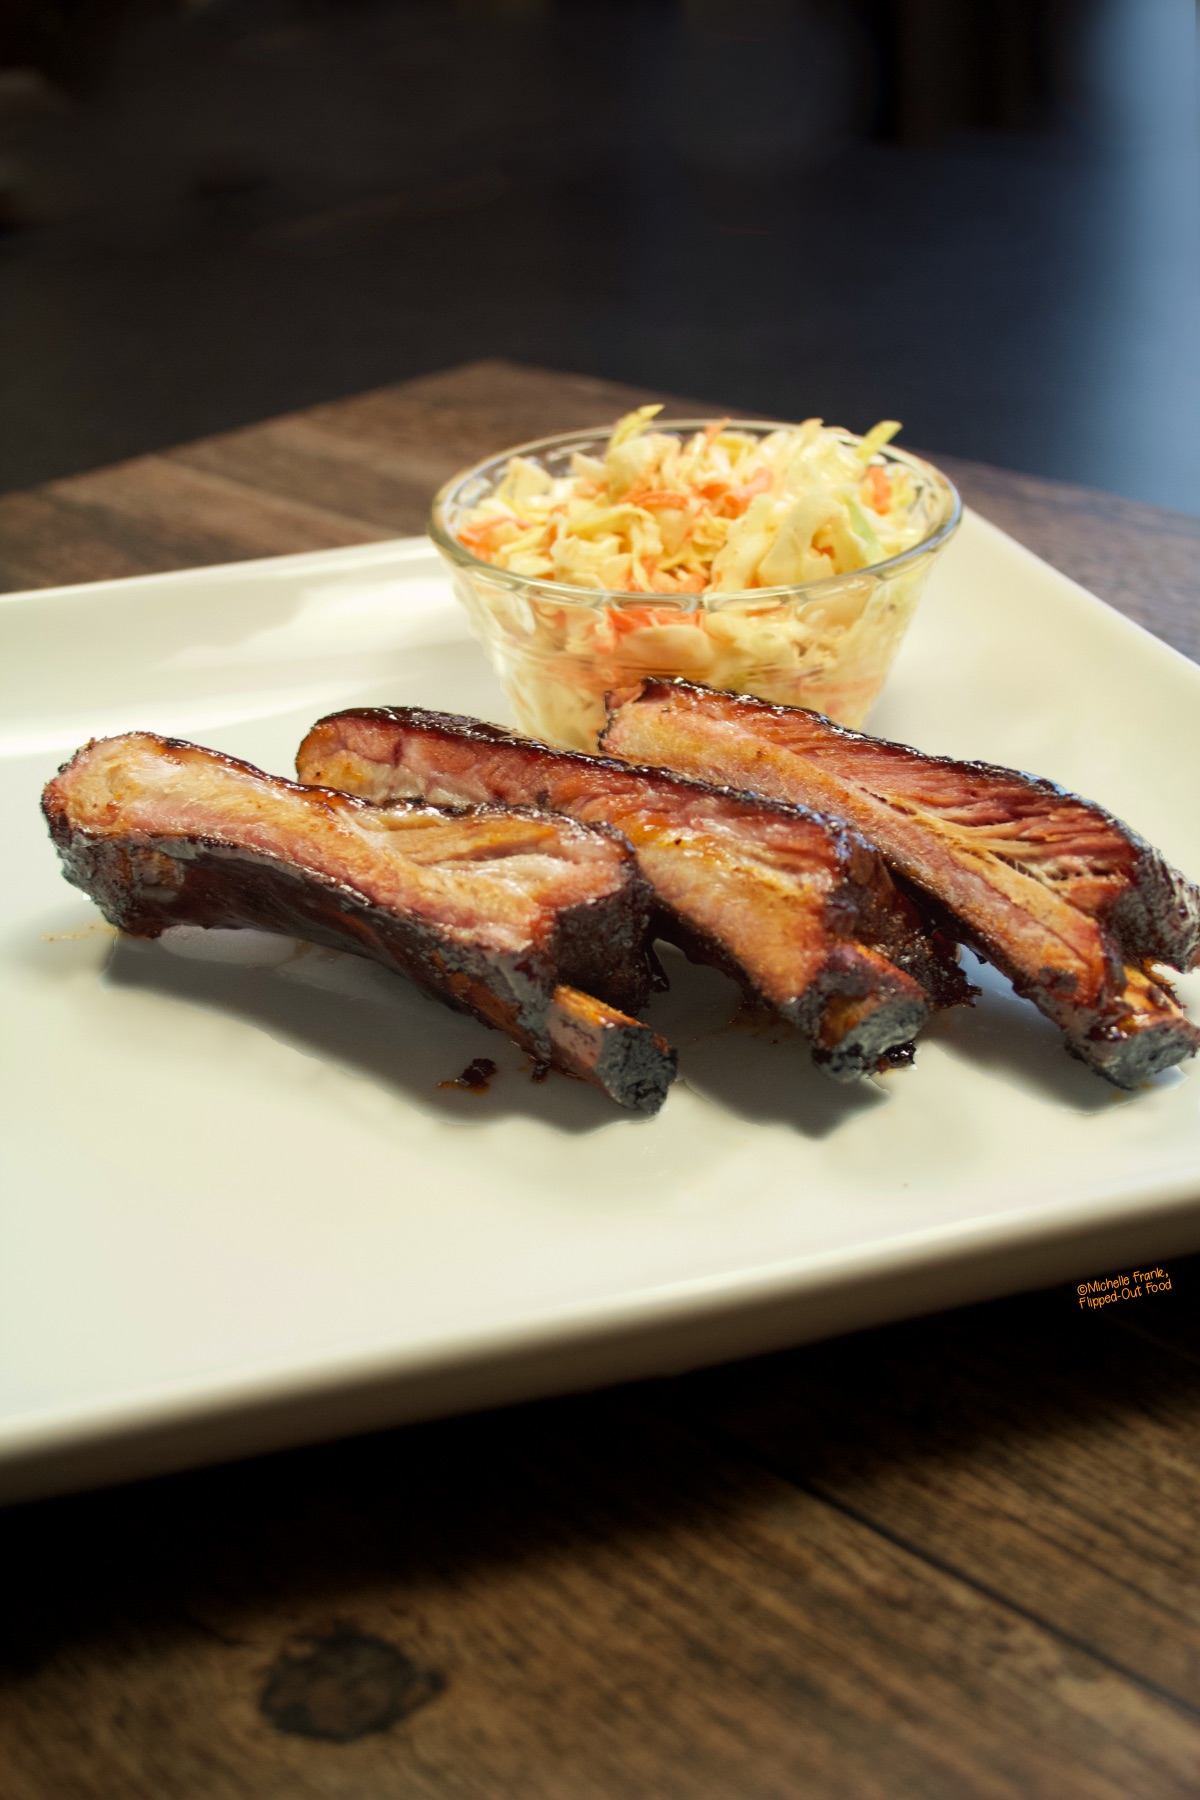 Three perfectly smoked ribs, fresh off the charcoal grill, served with coleslaw.